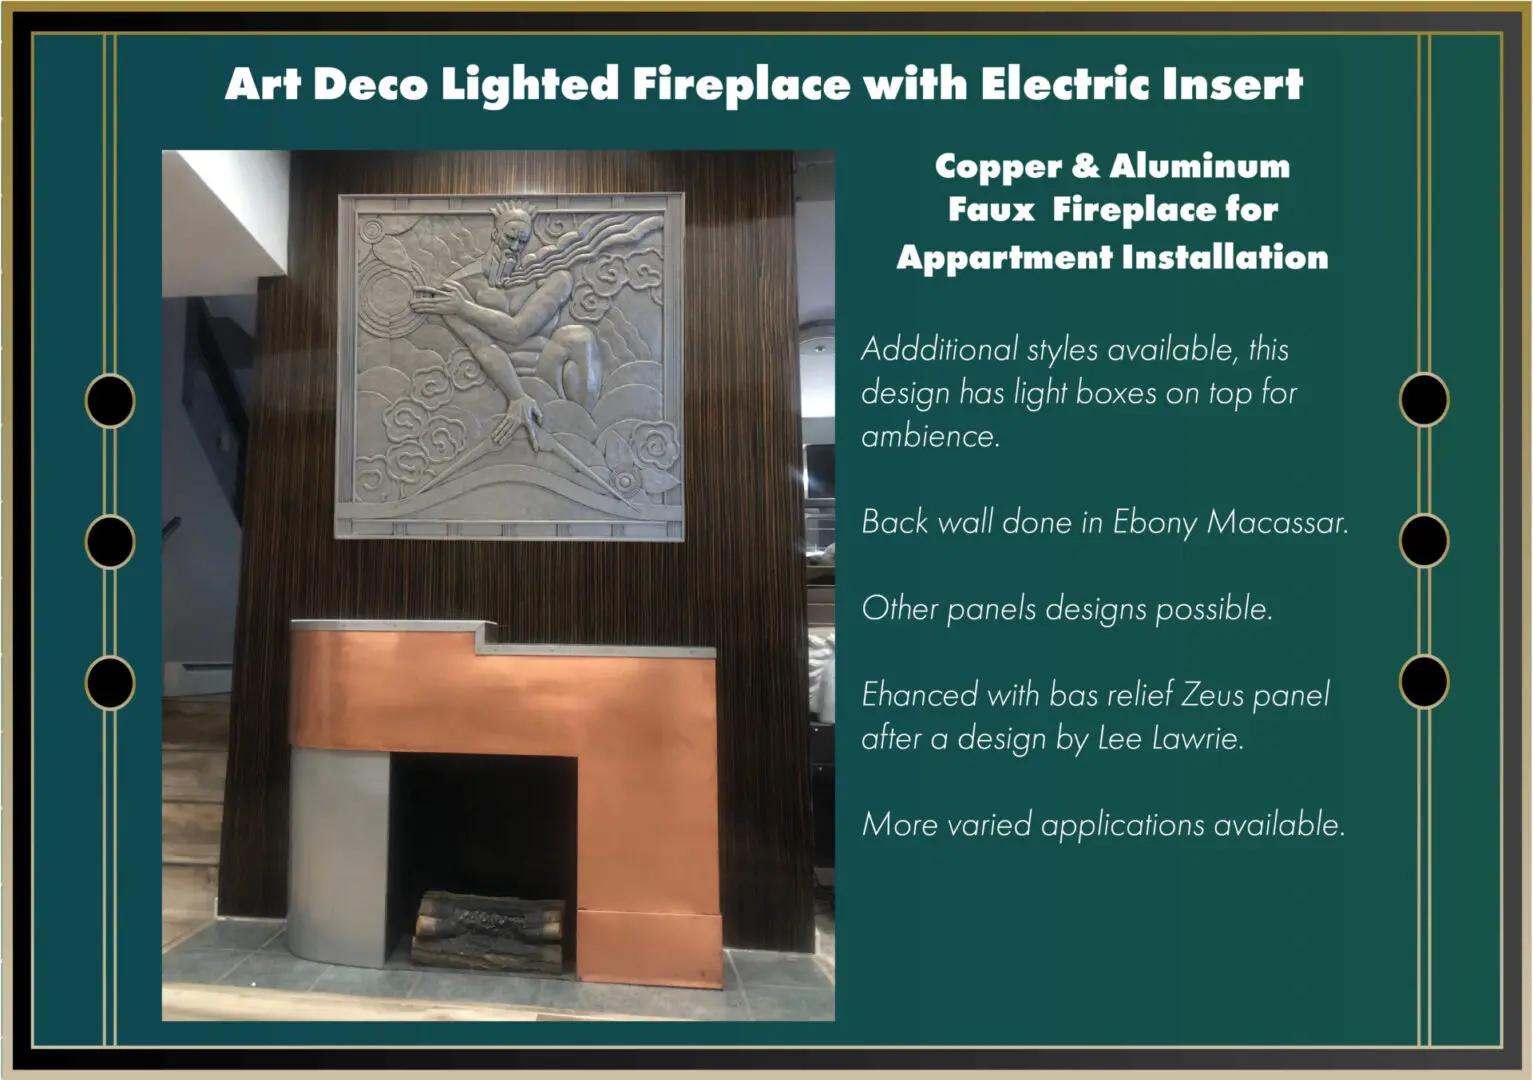 Art Deco Lighted Fireplace with Electric Insert